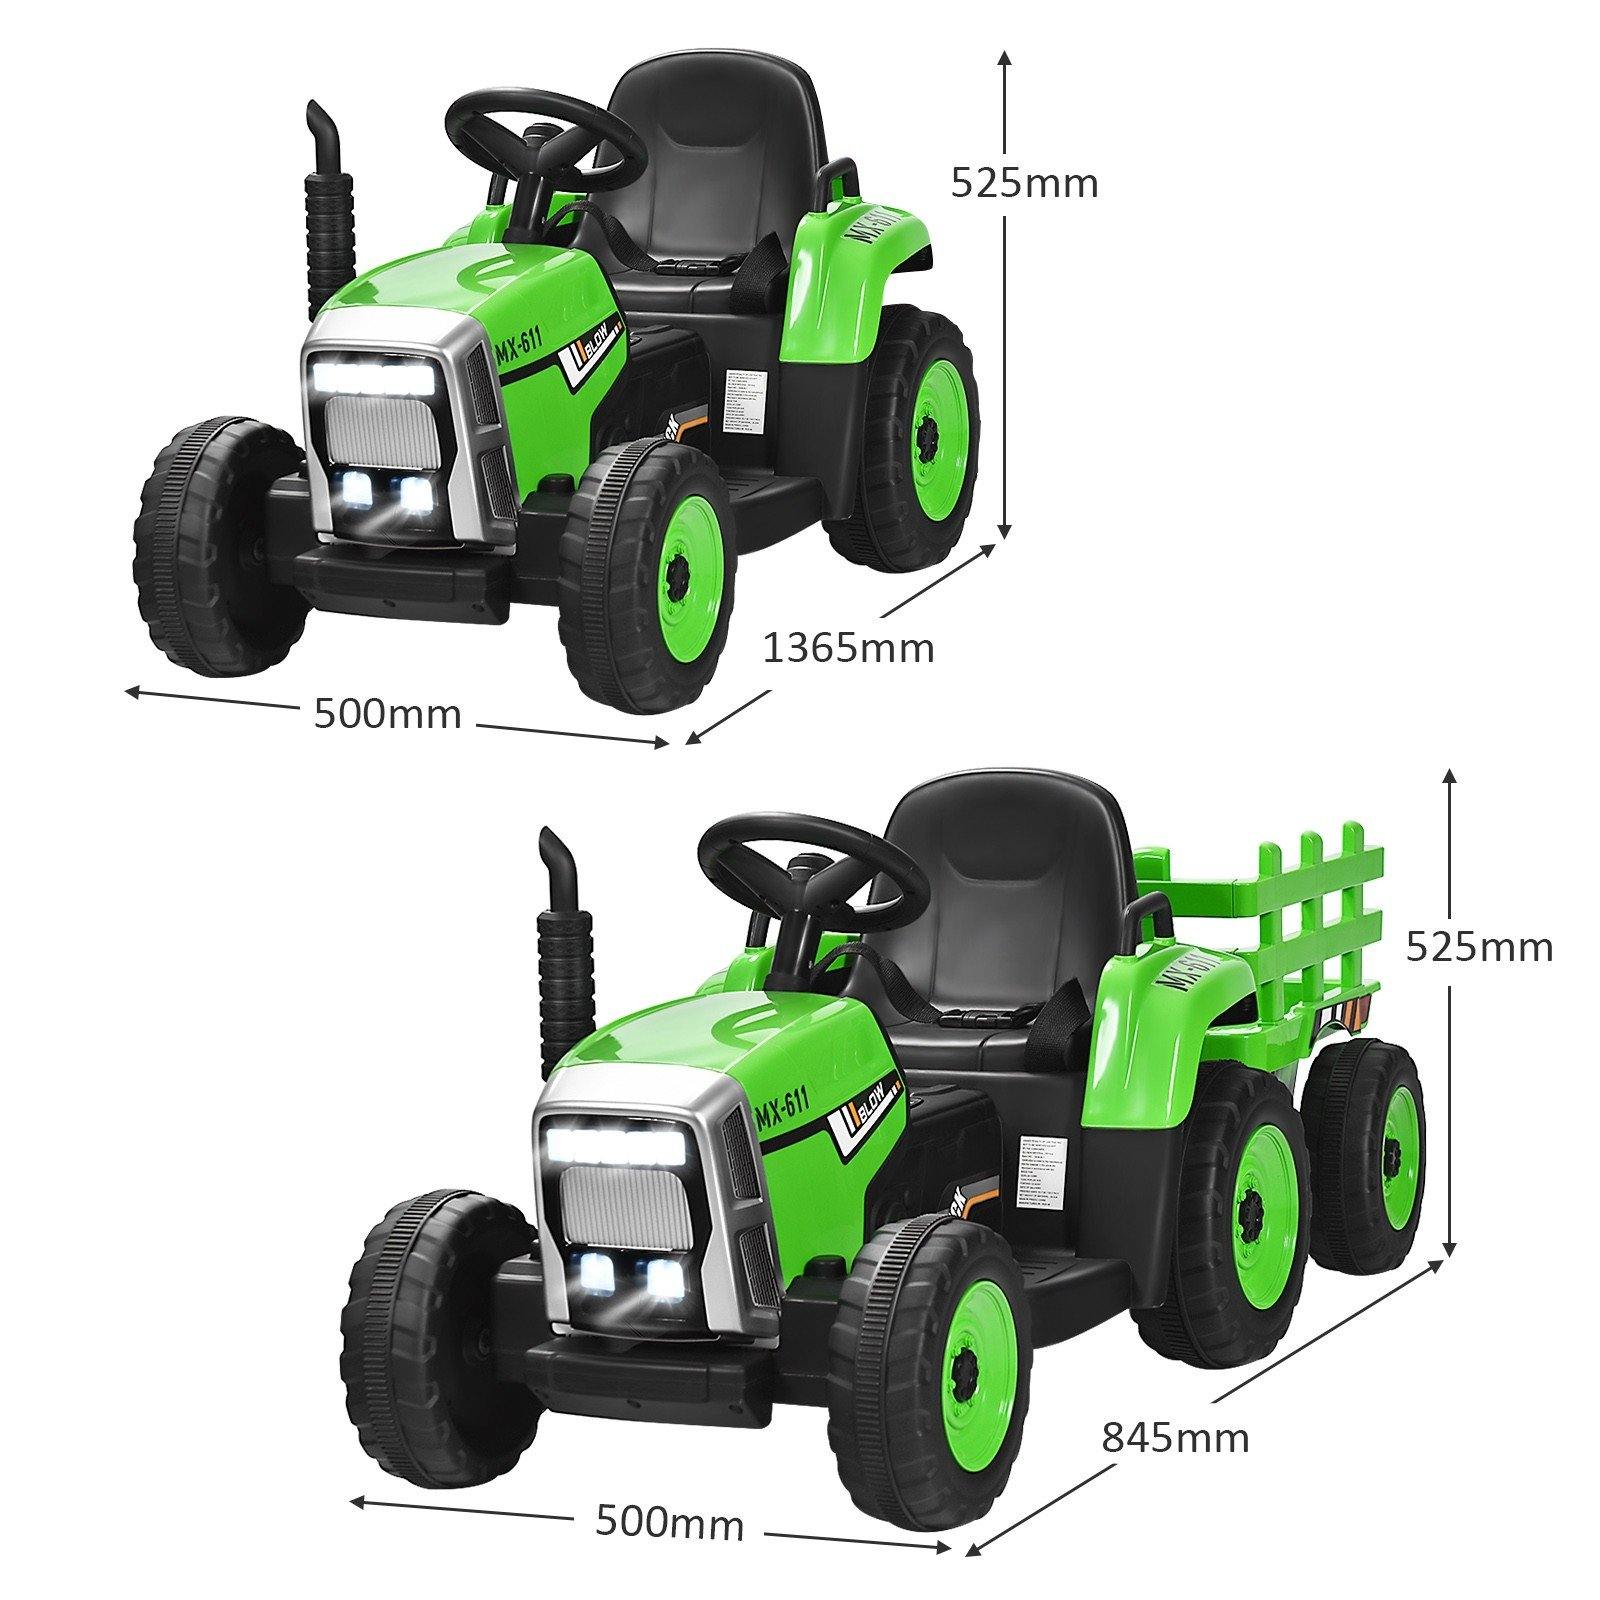 12V Kids Ride On Tractor with Trailer Ground Loader, Green